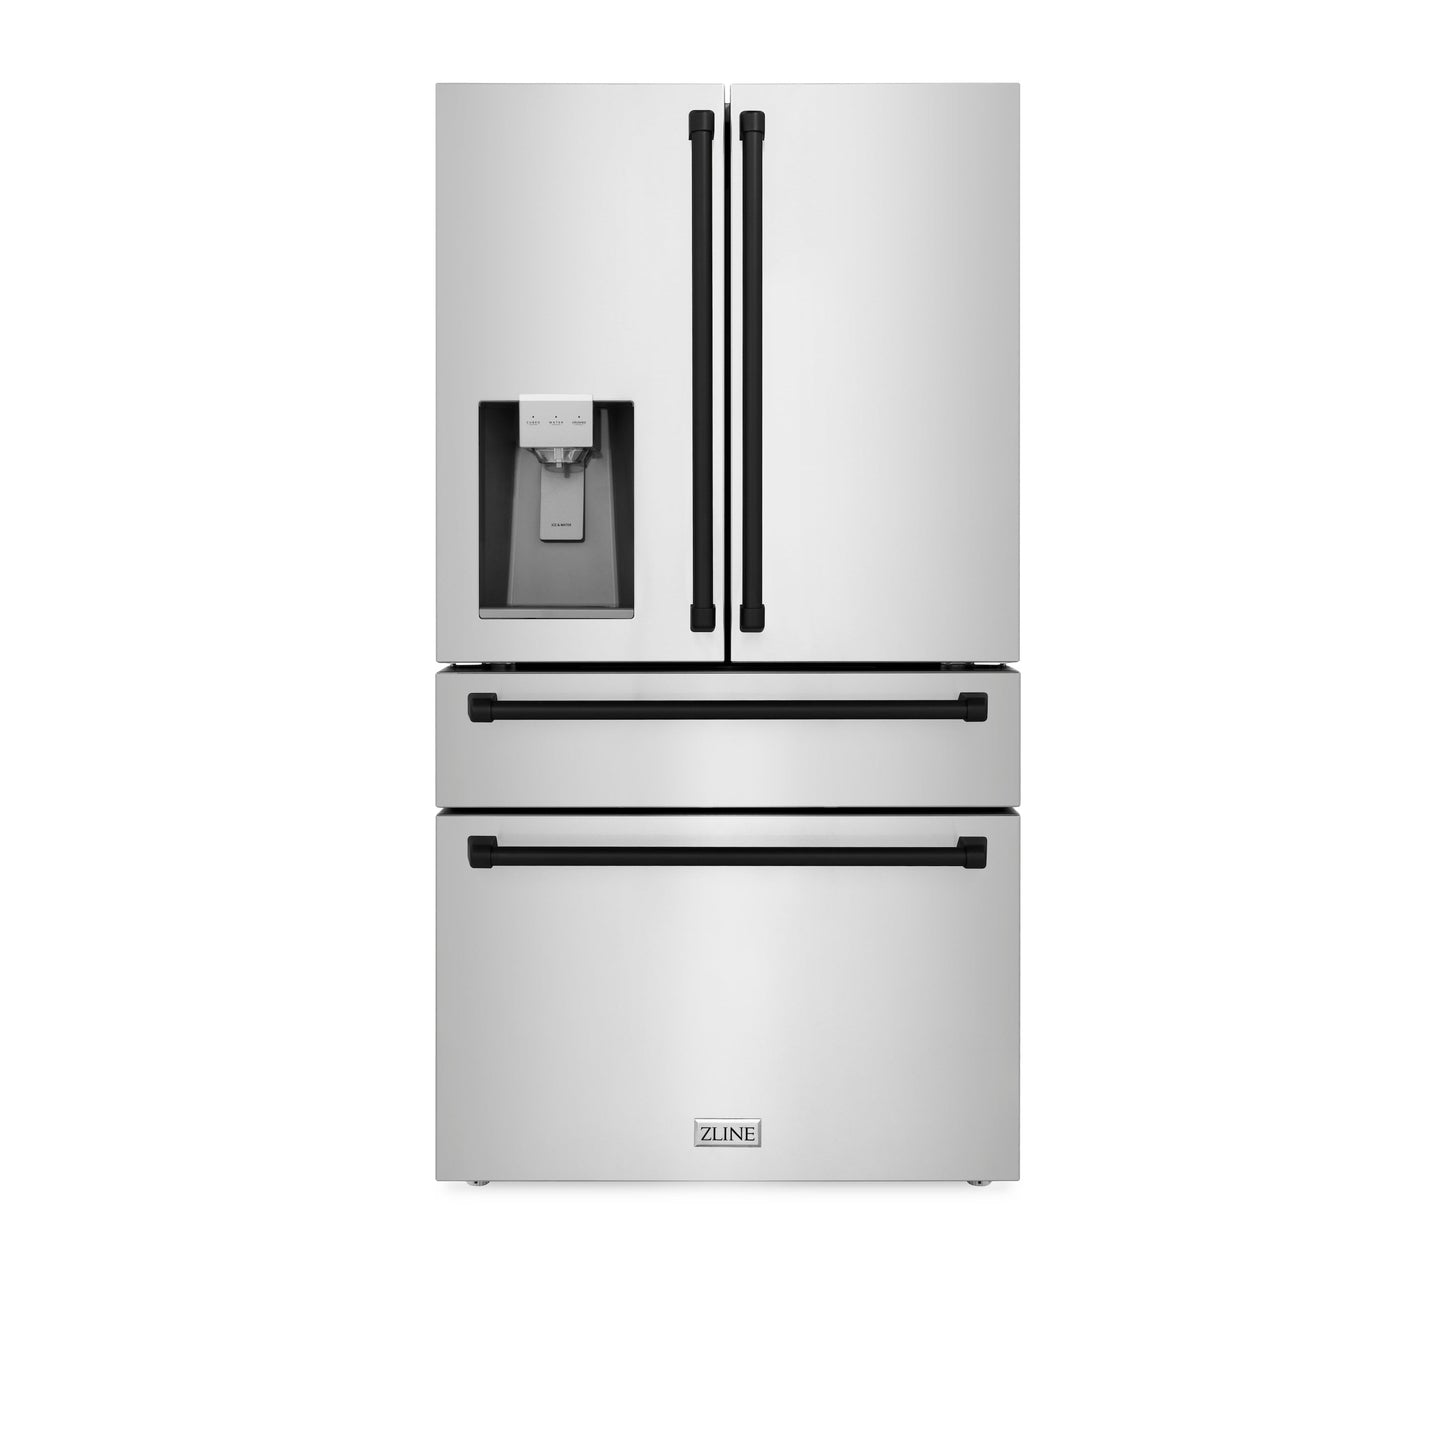 ZLINE 36" Autograph Edition 21.6 cu. ft Freestanding French Door Refrigerator With Water and Ice Dispenser in Fingerprint Resistant Stainless Steel With Matte Black Accents